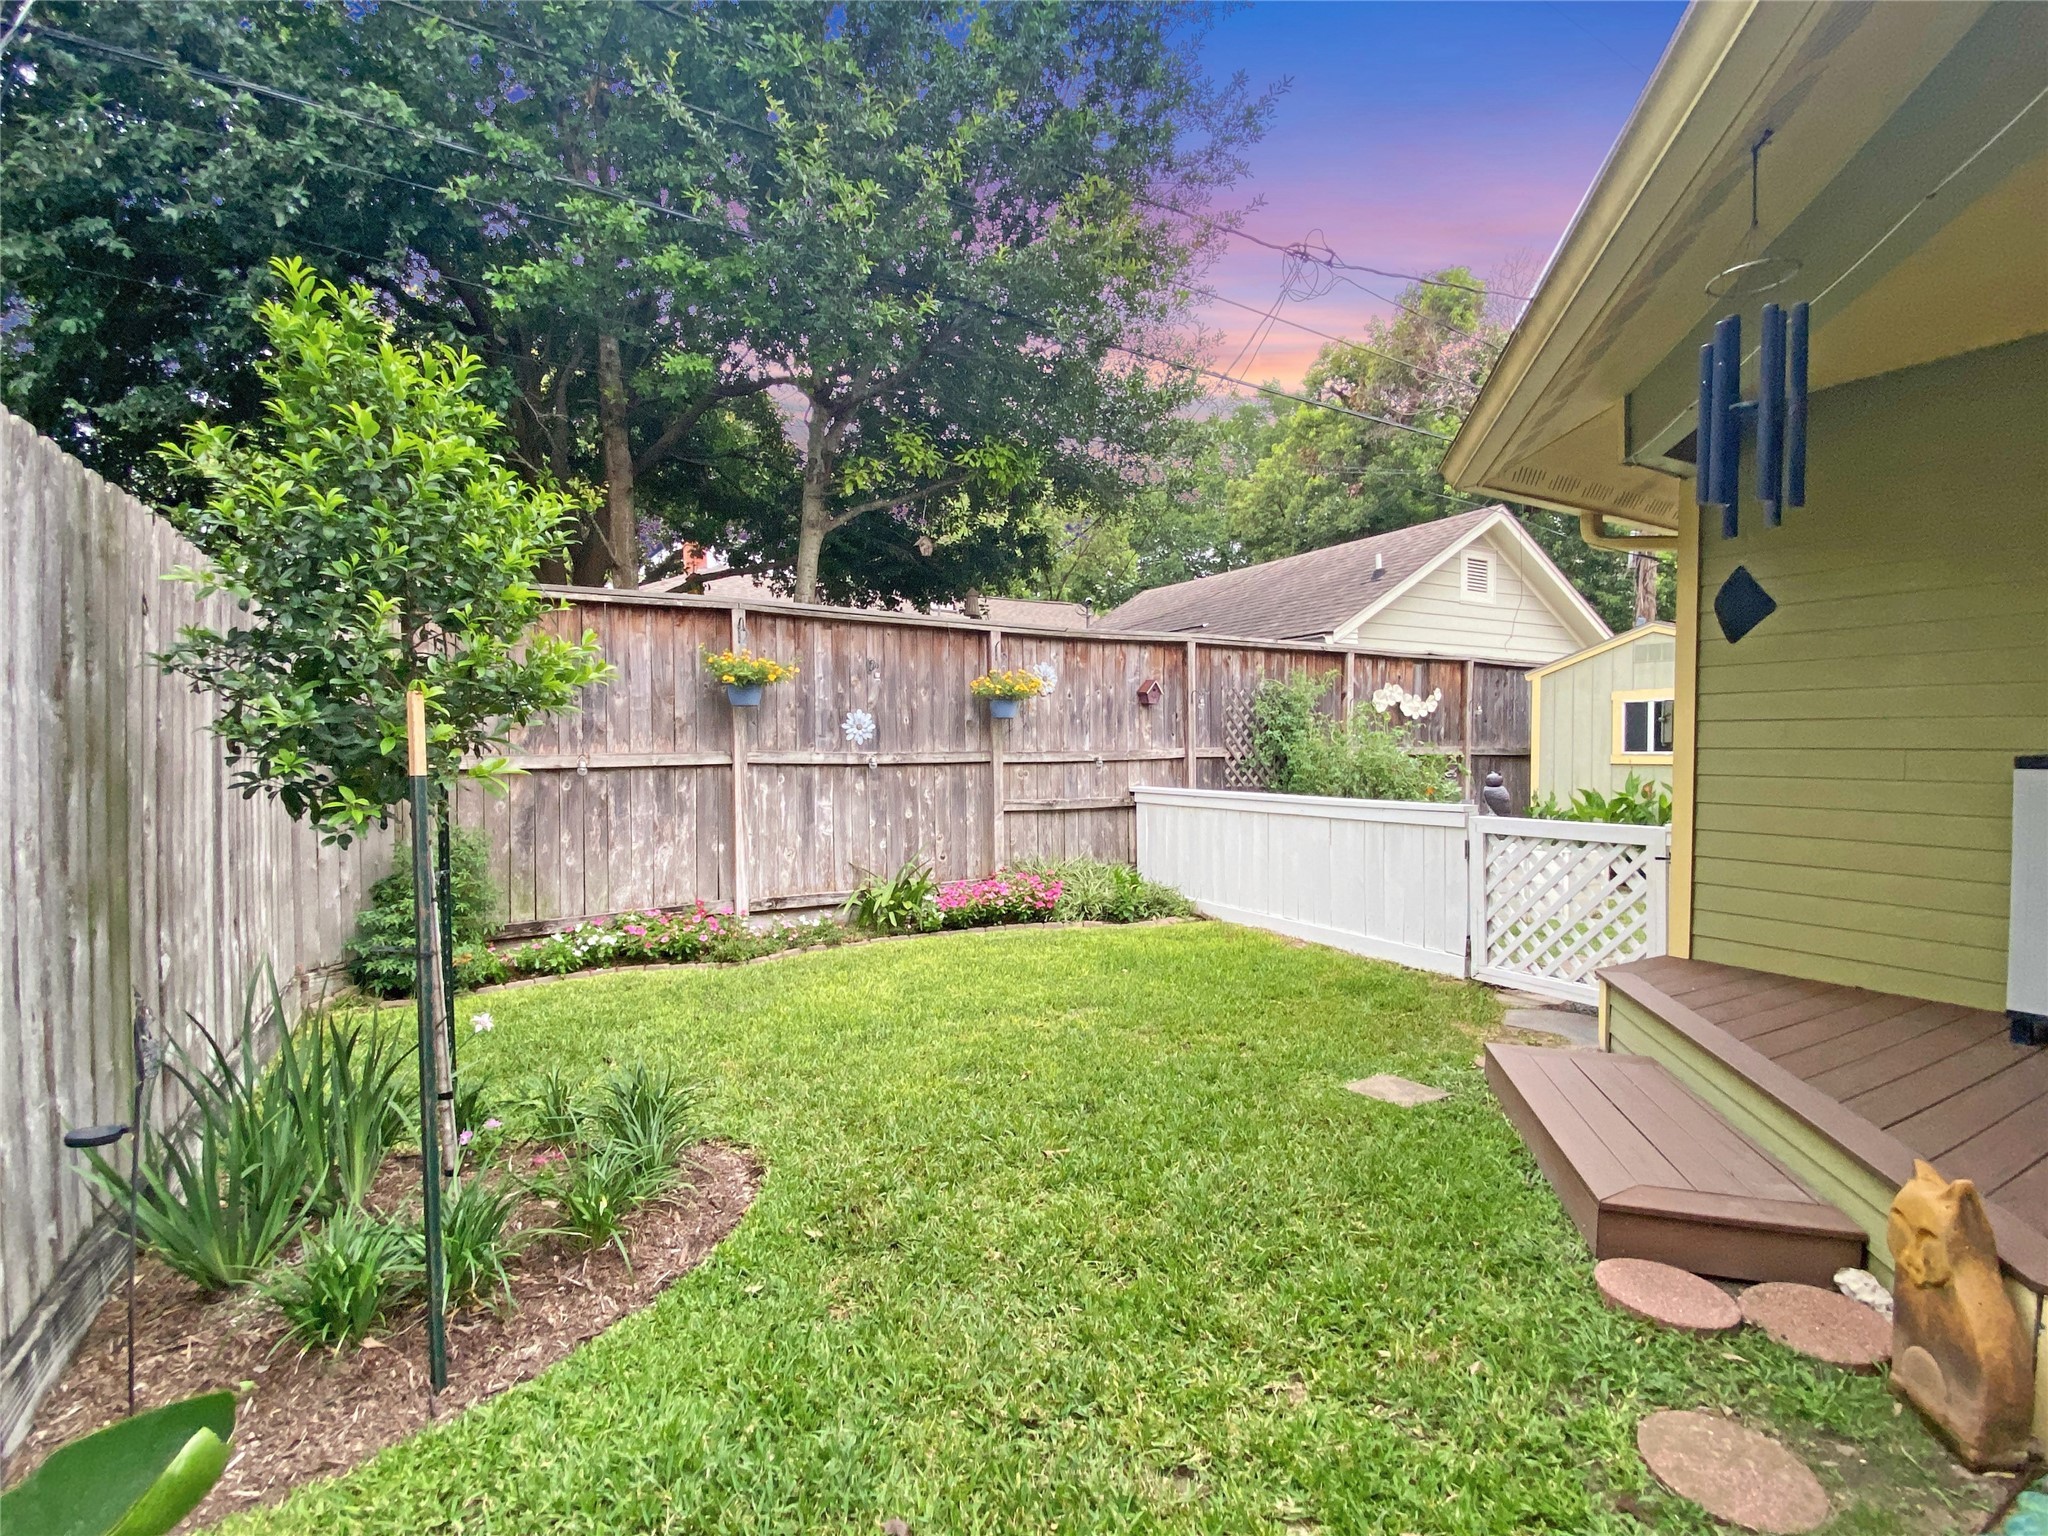 The backyard is currently split by the quaint, white fence leading to the vegetable garden.